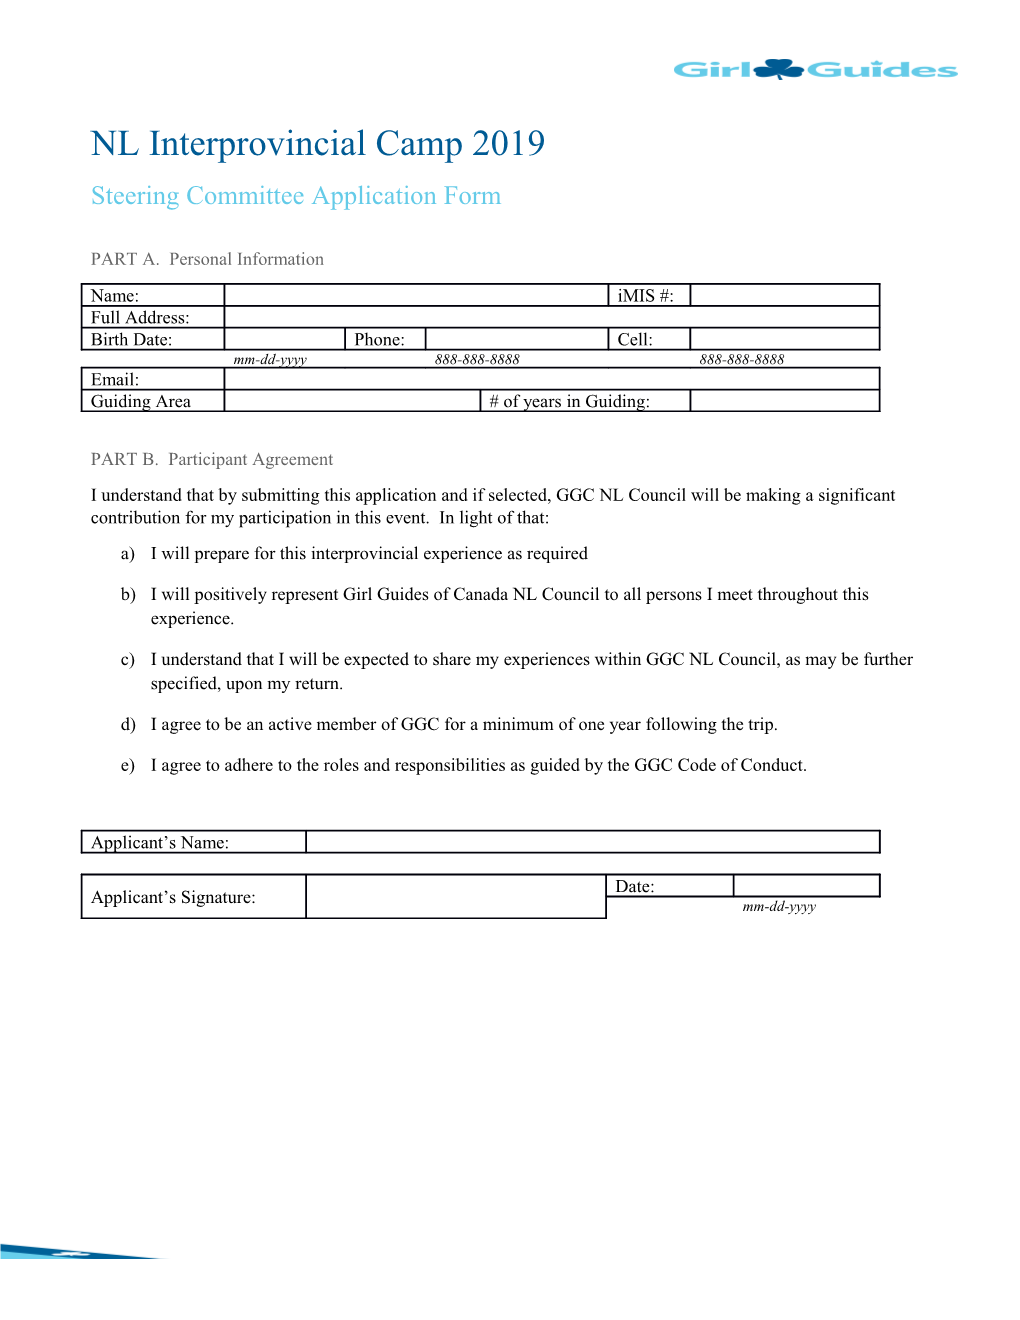 Steering Committee Application Form